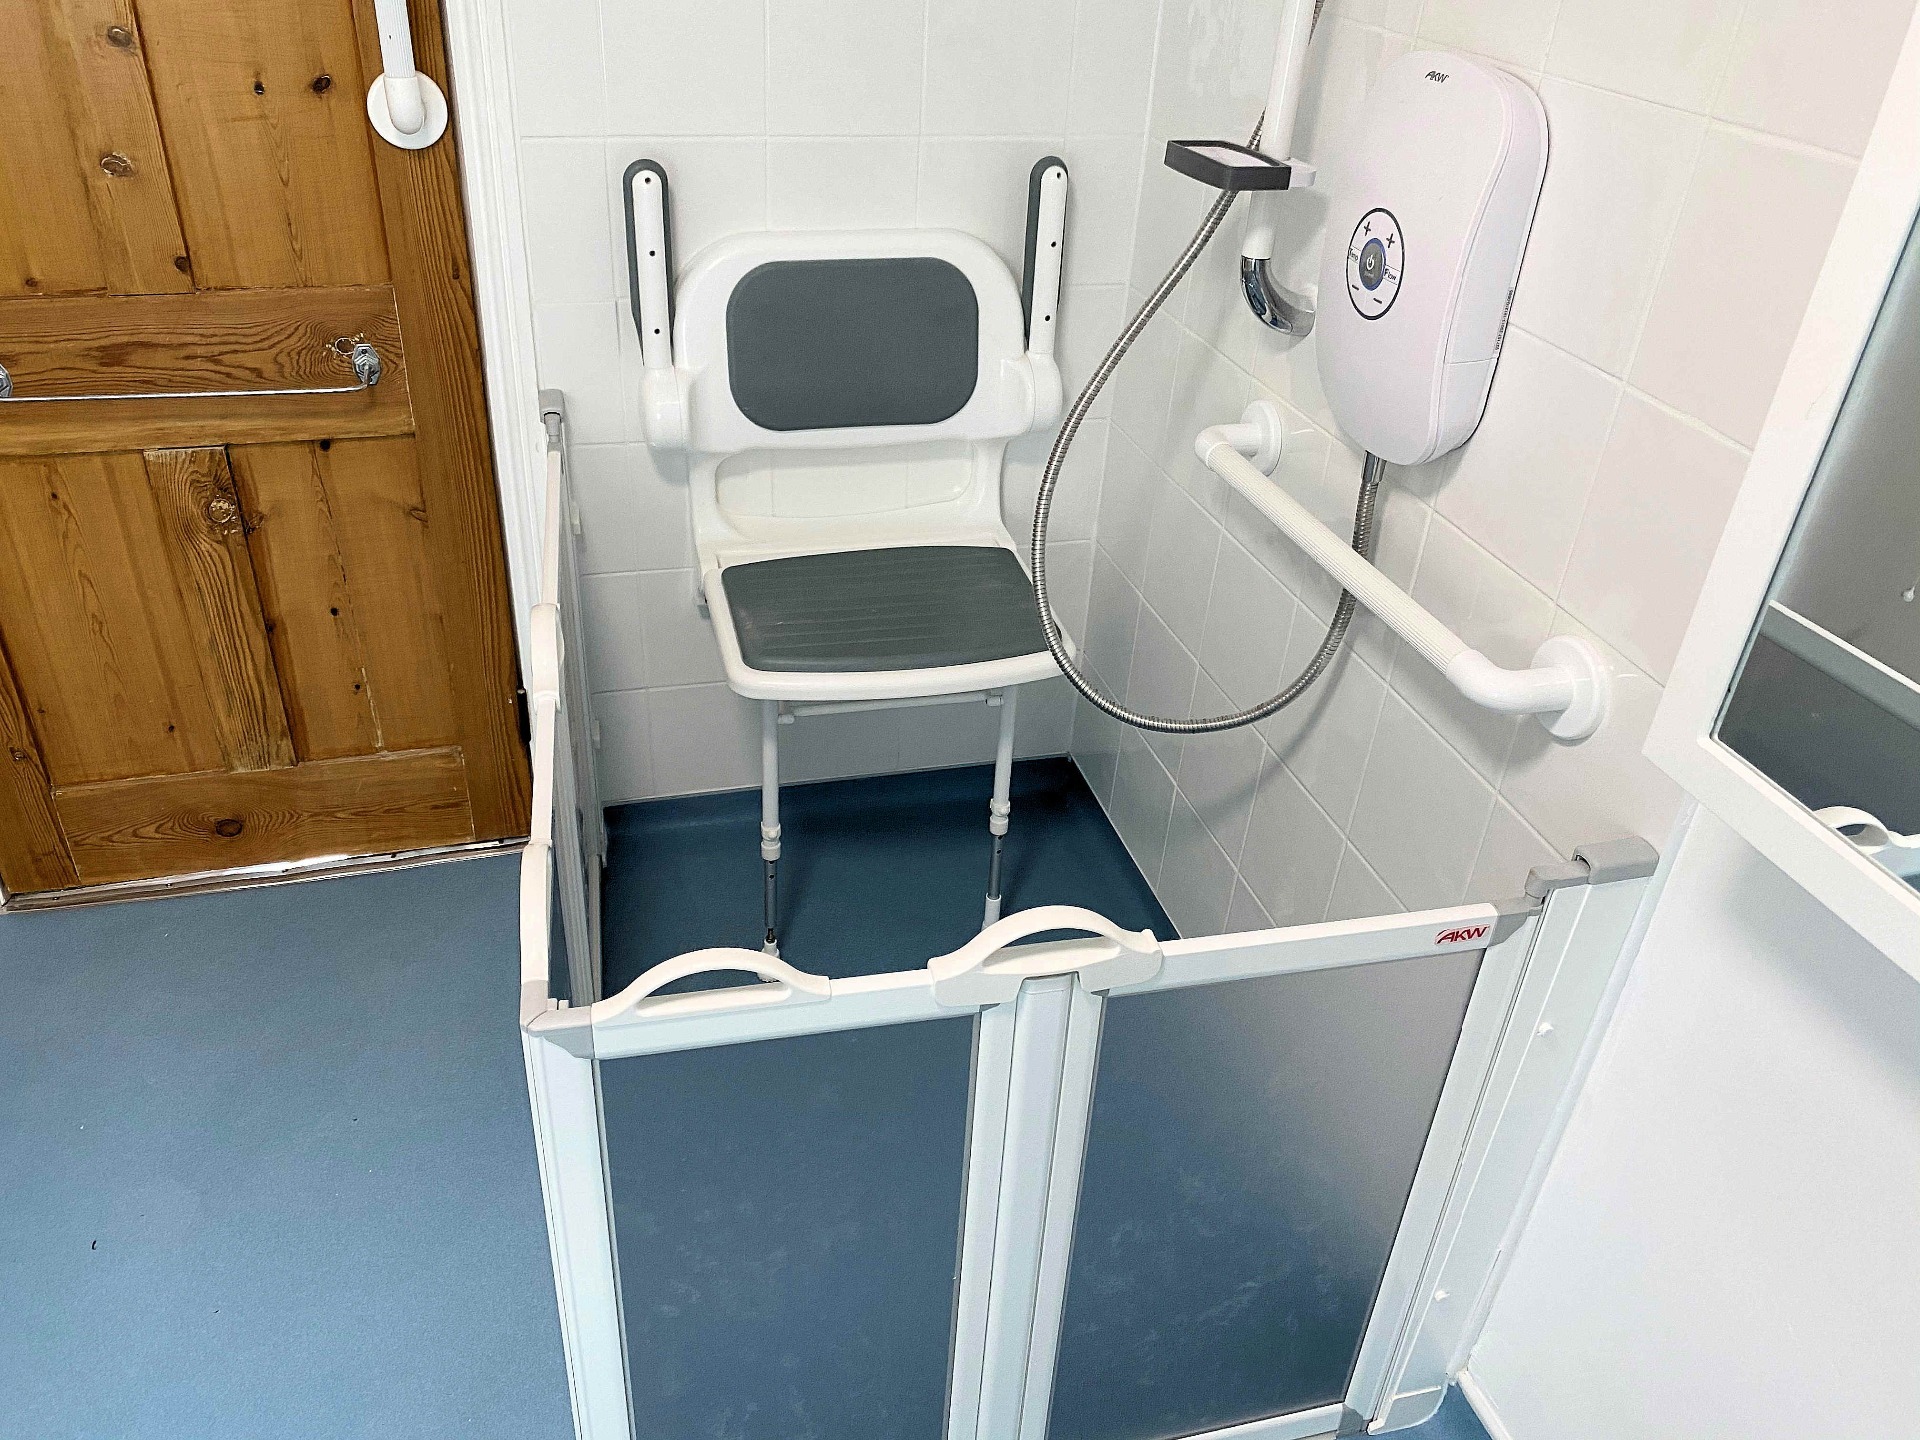 Assisted Bathroom, Accessible shower screen and seat. Barnstaple